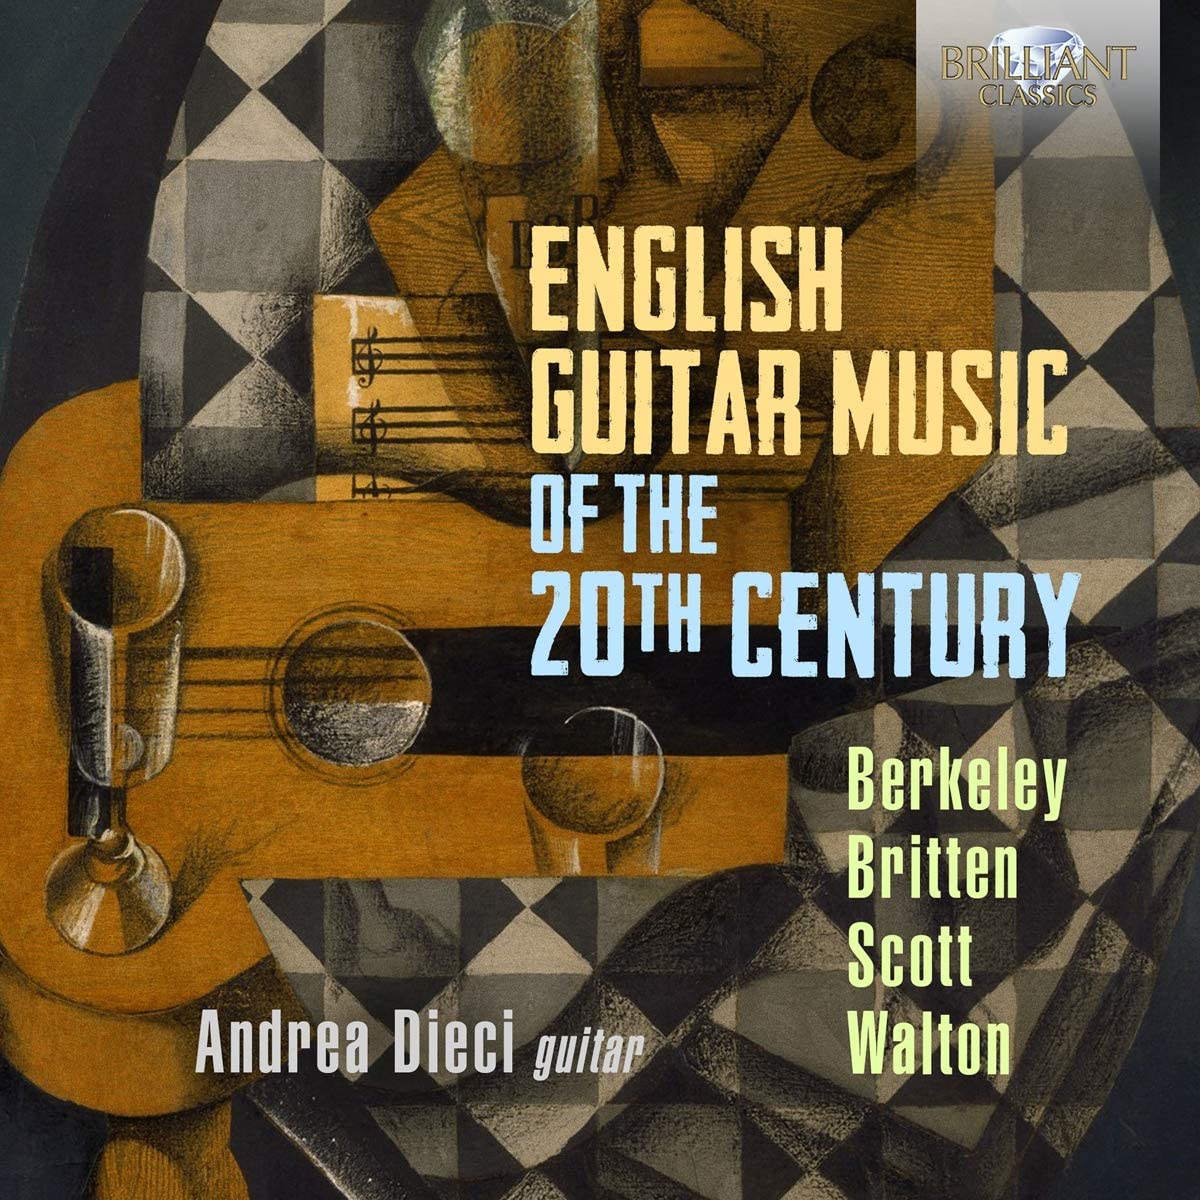 English Guitar Music of the 20th Century, Andrea Dieci